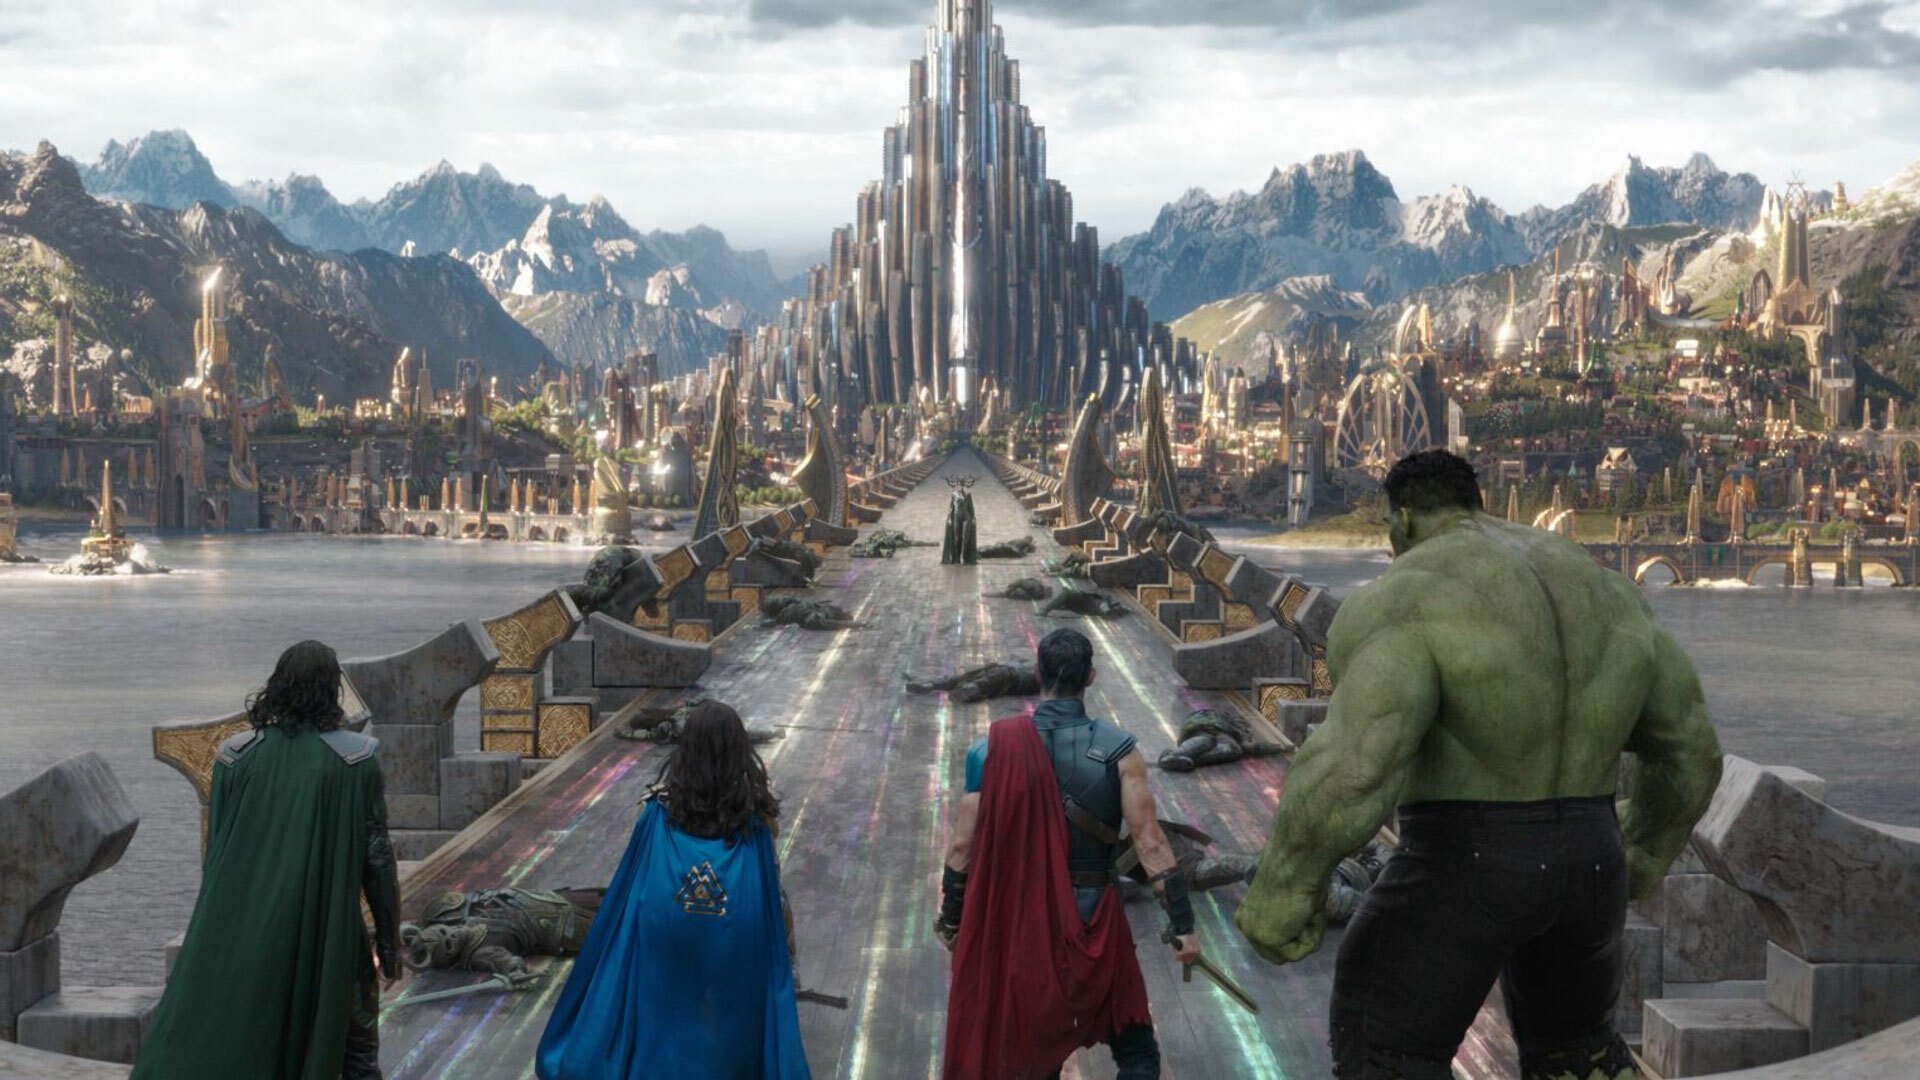 A still from "Thor: Ragnarok." Loki, Valkyrie, Thor, and Hulk, seen from behind, face off against Hera on the Bifrost.